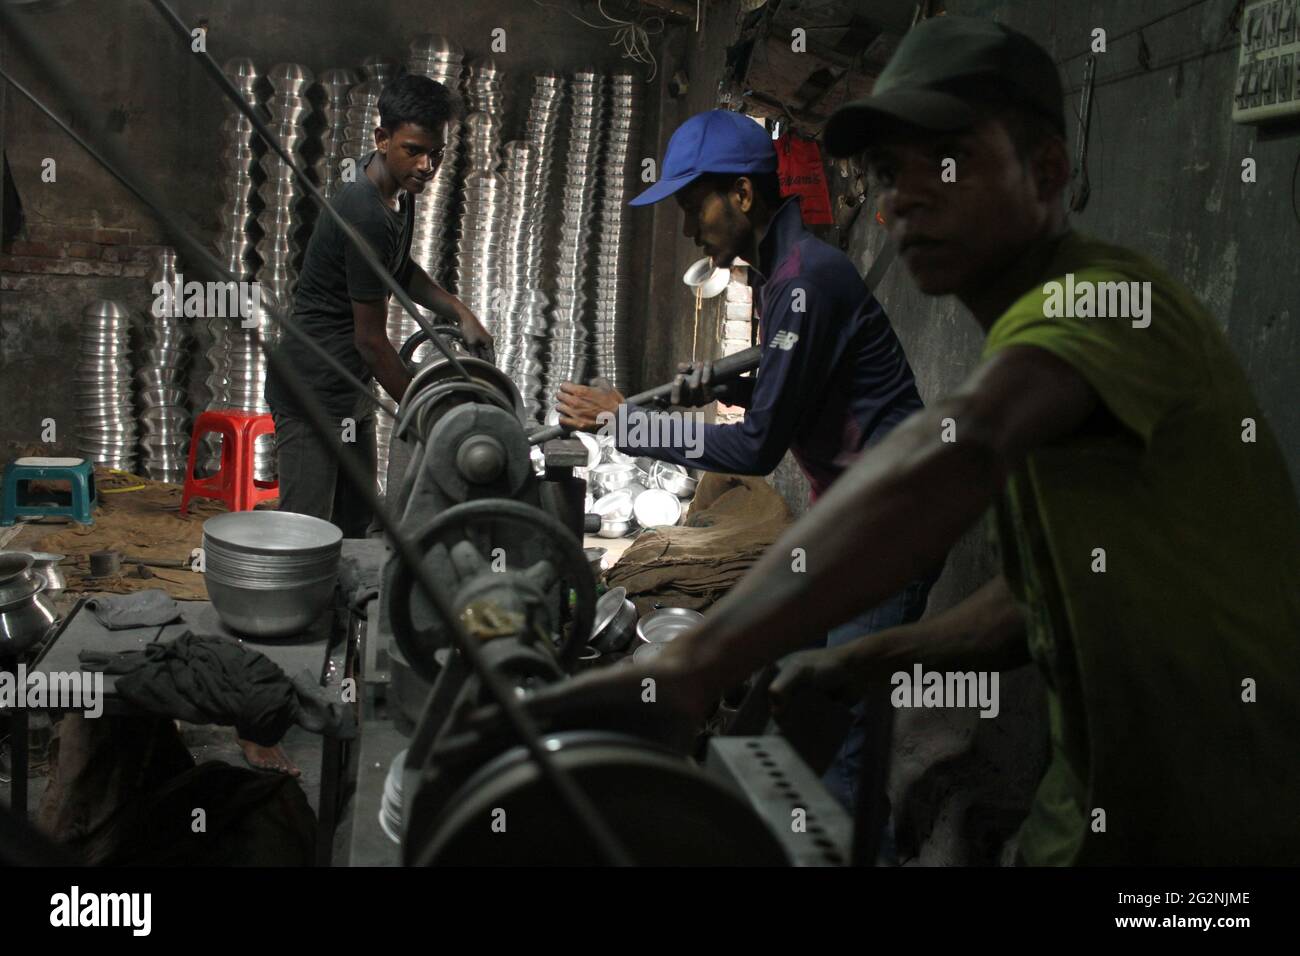 Dhaka Dhaka Bangladesh 12th June 21 Child Labor Are Works In A Silver Cooking Pot Manufacturing Factory In Dhaka Bangladesh On June 12 21 In This Type Of Aluminum Factories Around 30 50 Employ